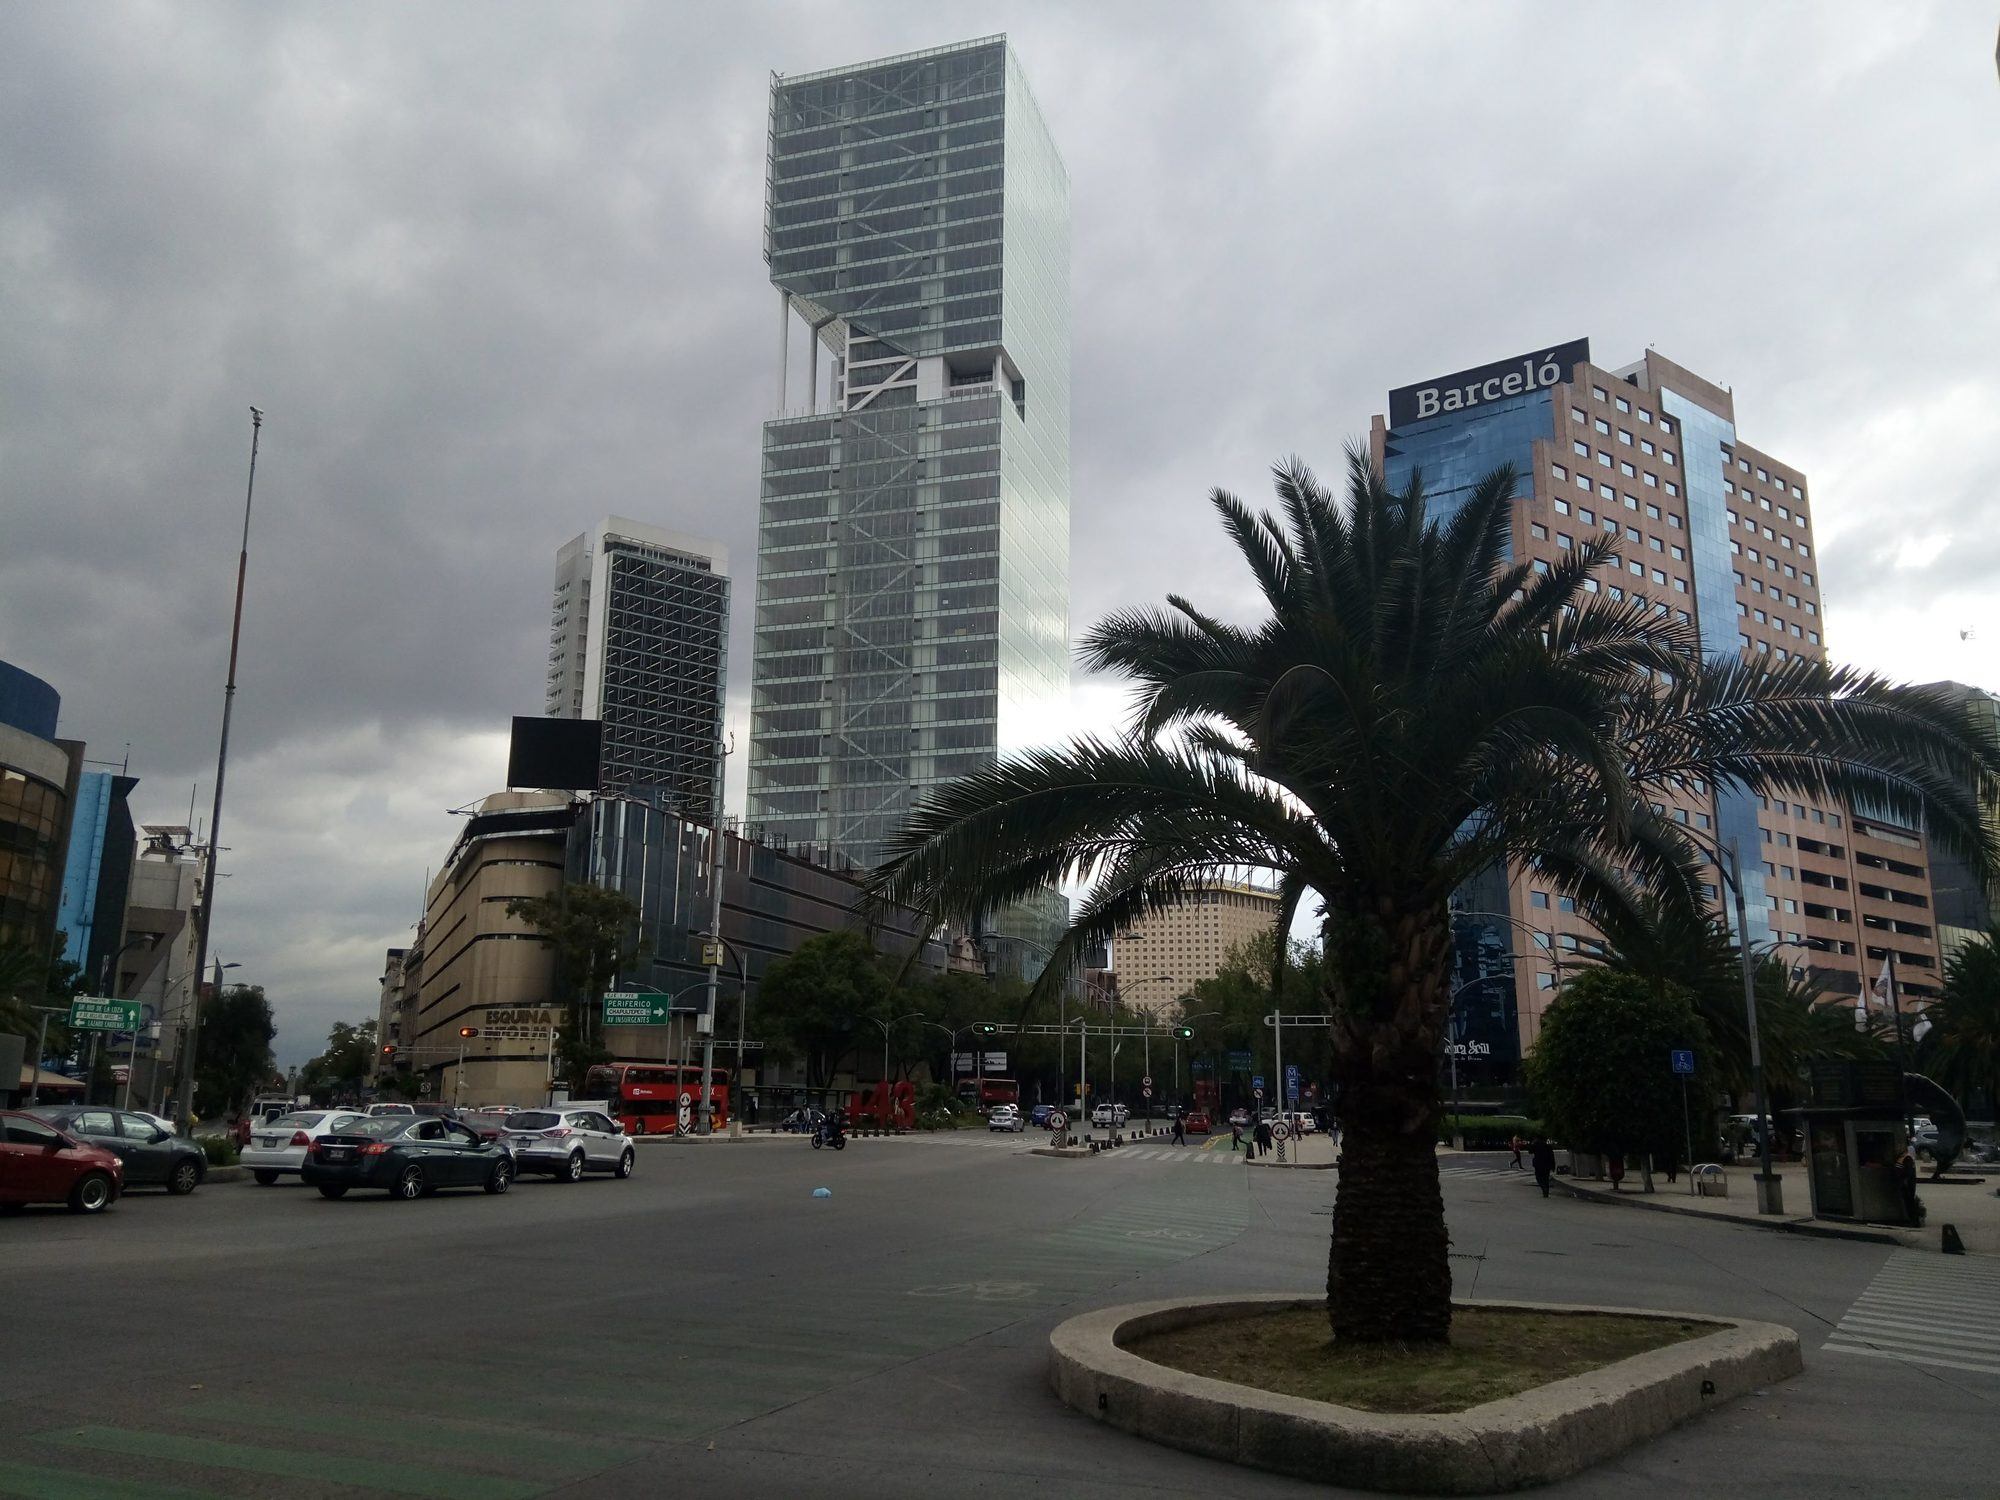 Travel in Mexico City